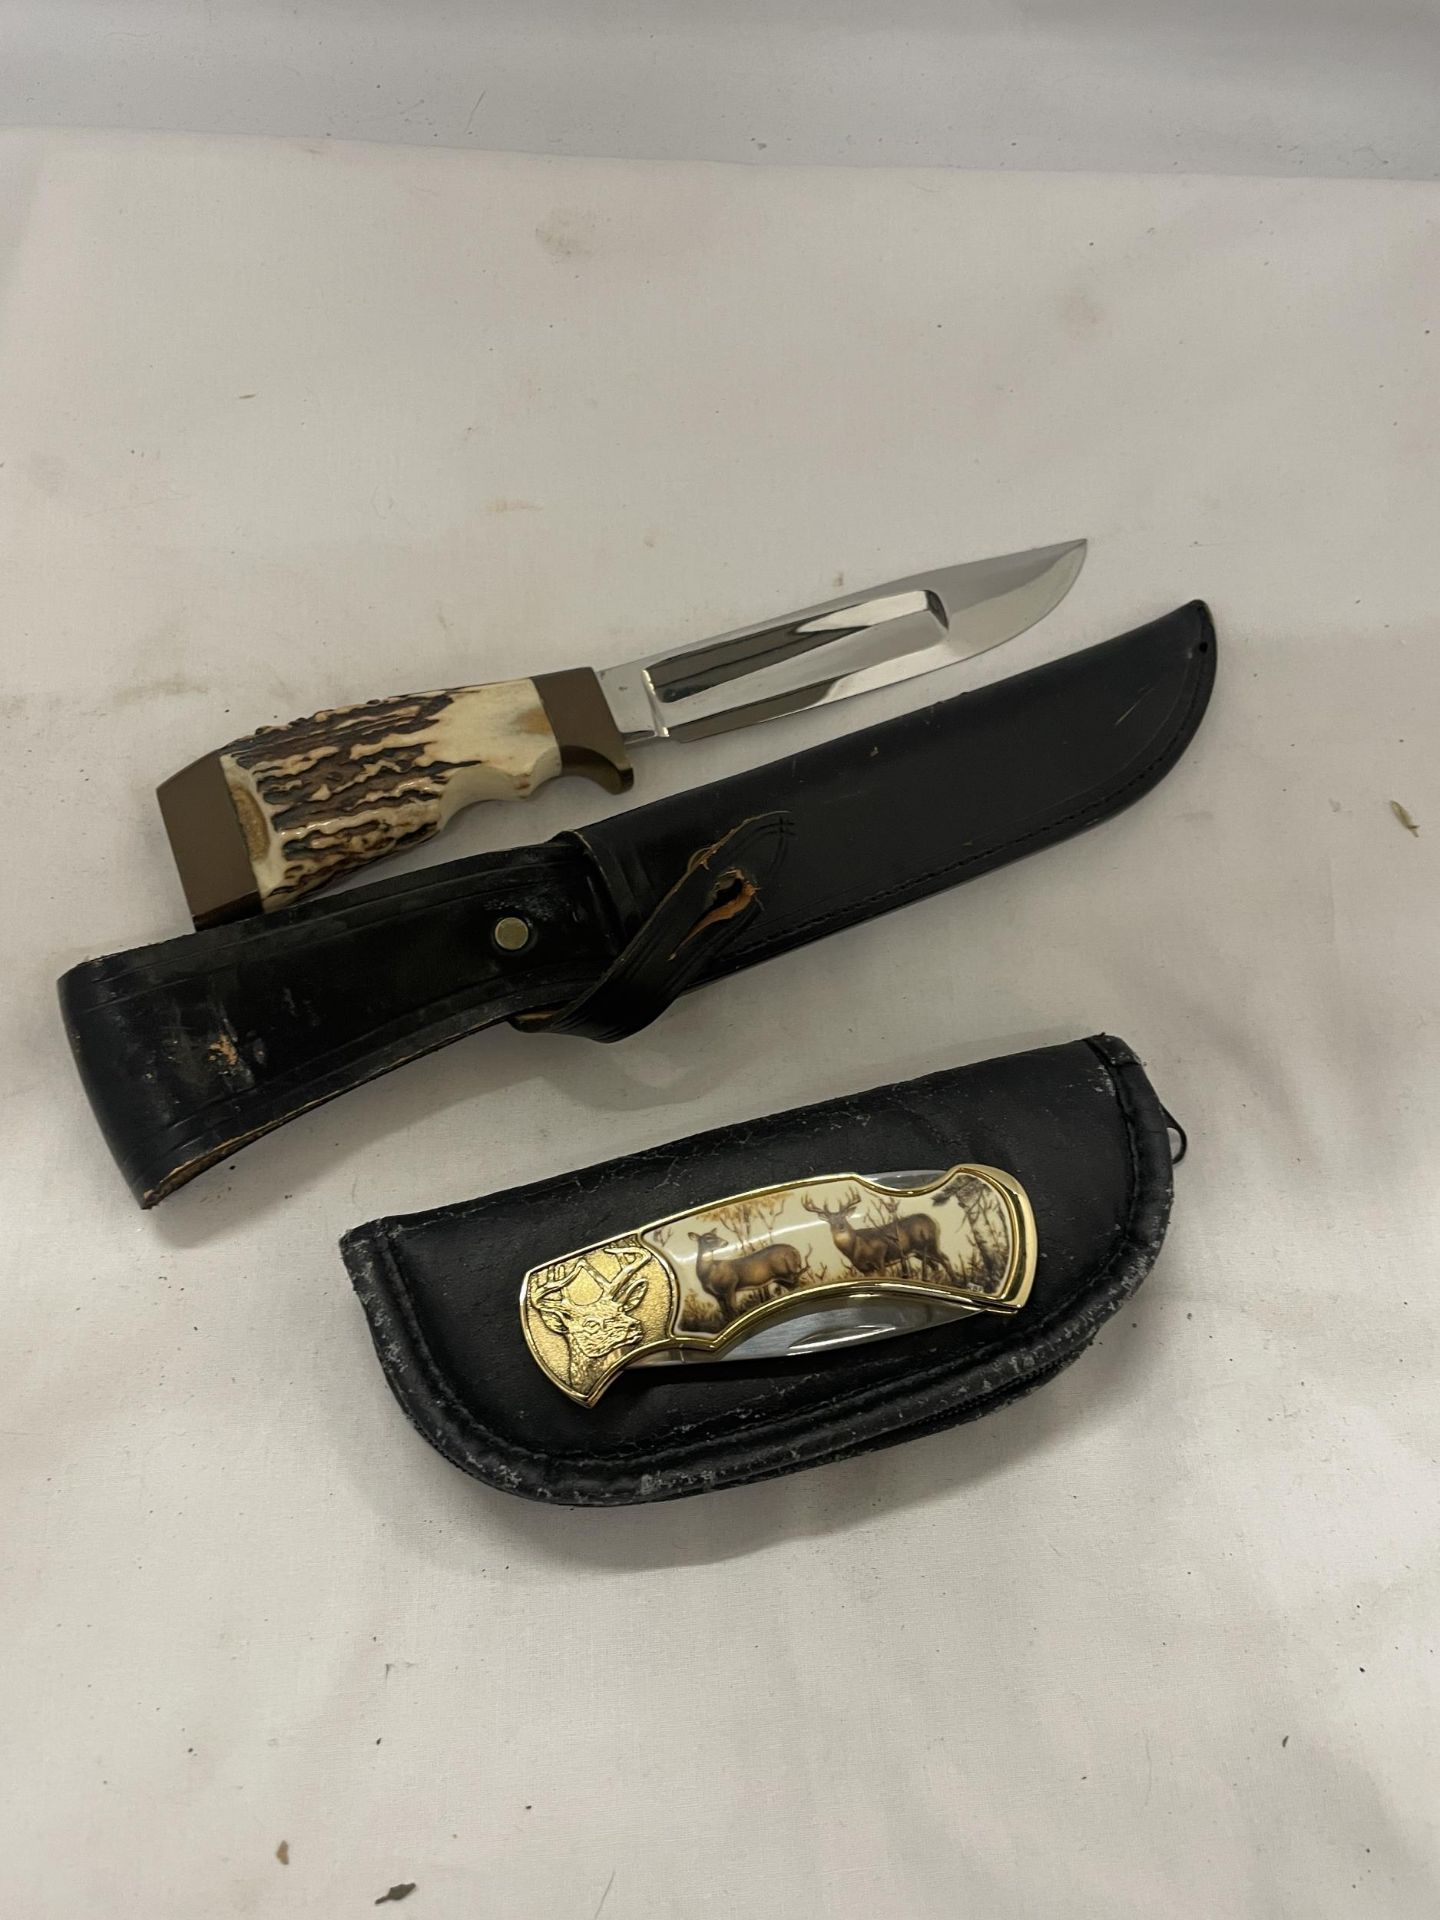 TWO CASED KNIVES TO INCLUDE A BONE HANDLED HUNTING KNIFE AND A DECORATIVE STAG DESIGN POCKET KNIFE